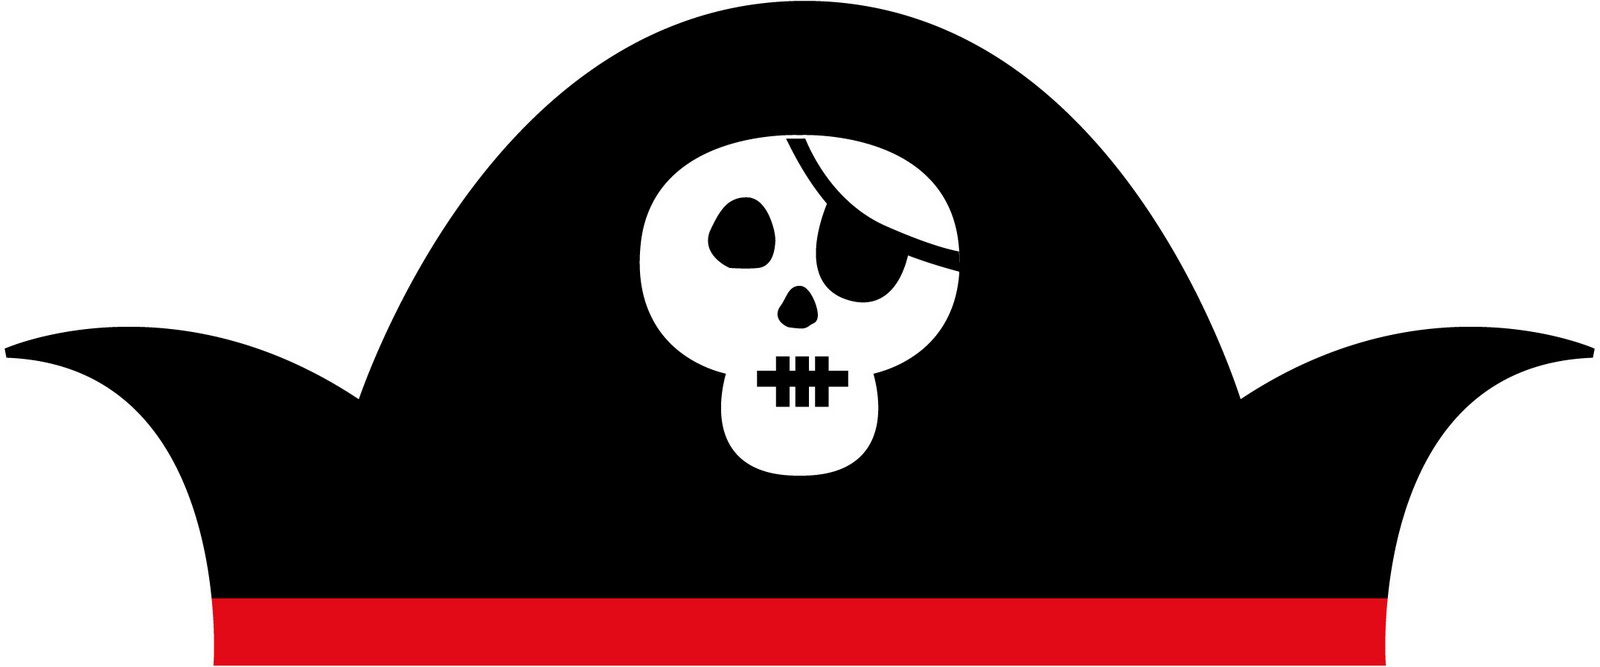 clipart pirates pictures - photo #34